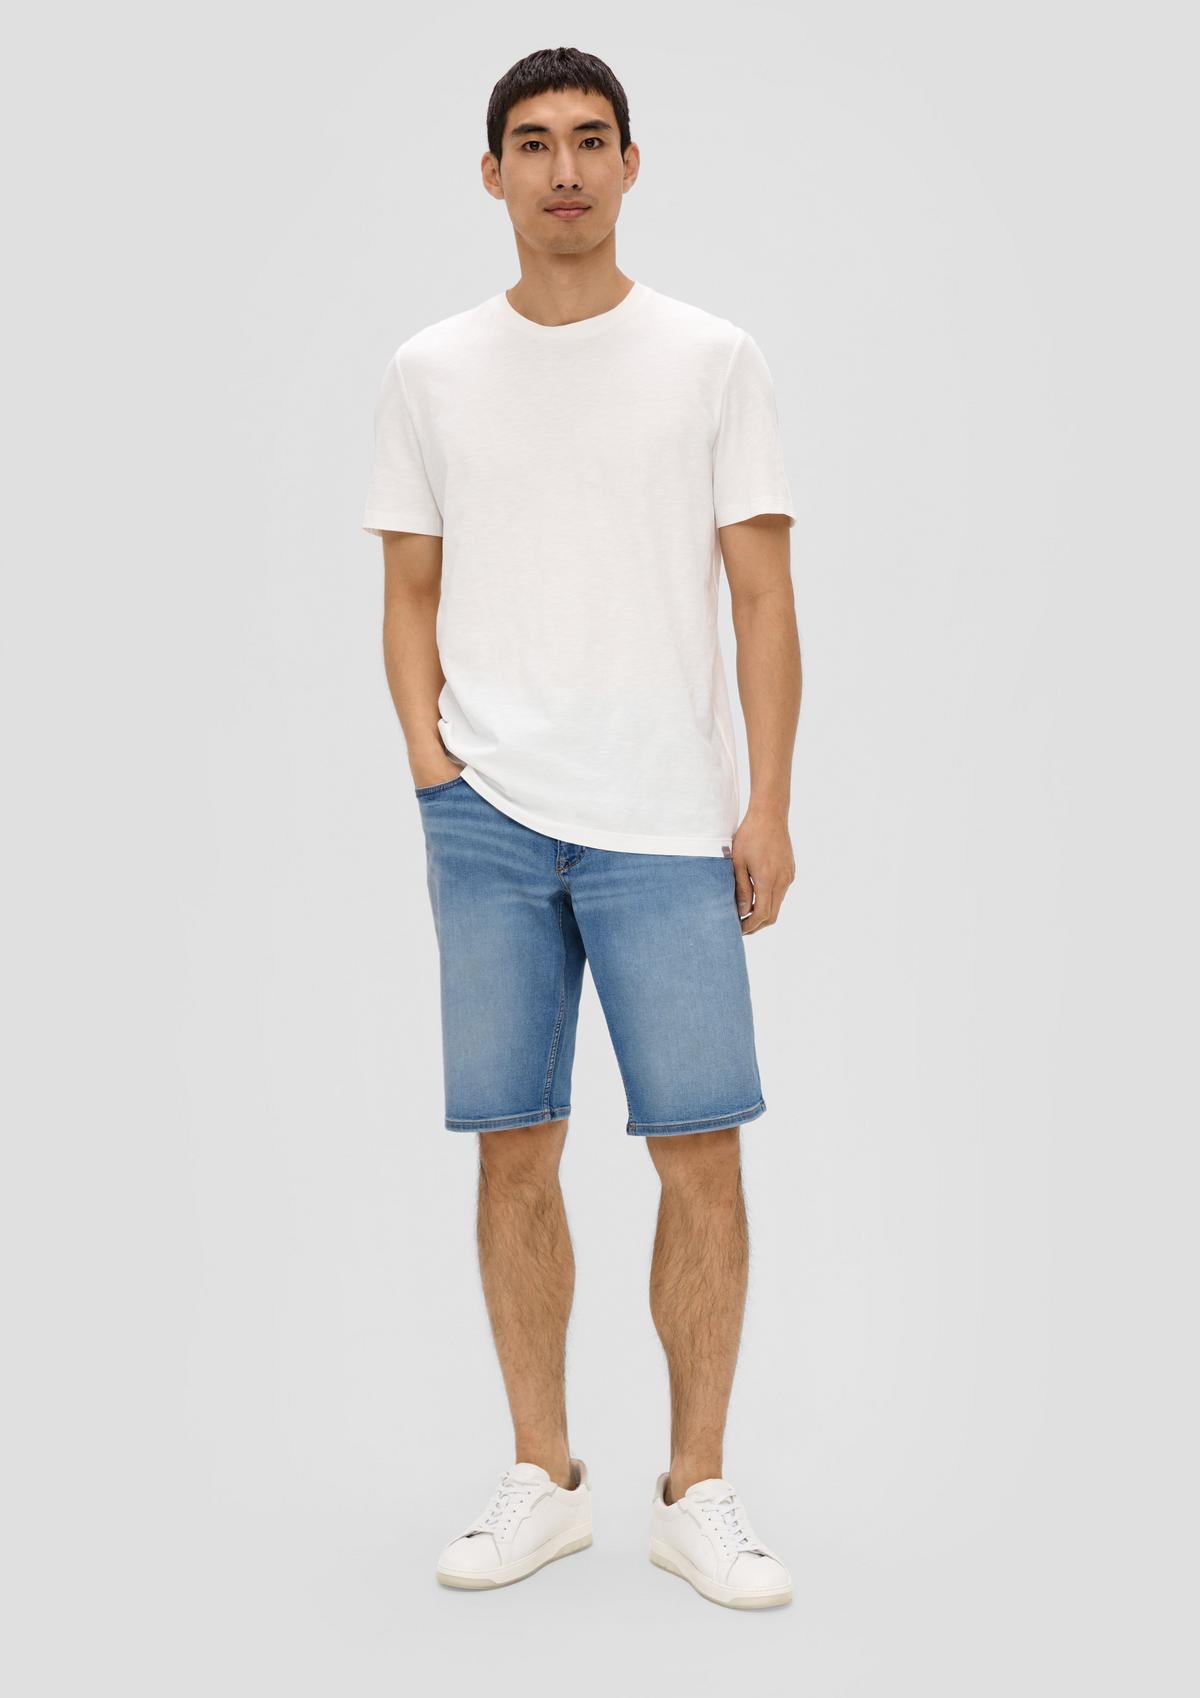 Jeans-Shorts / Regular Fit / Mid Rise